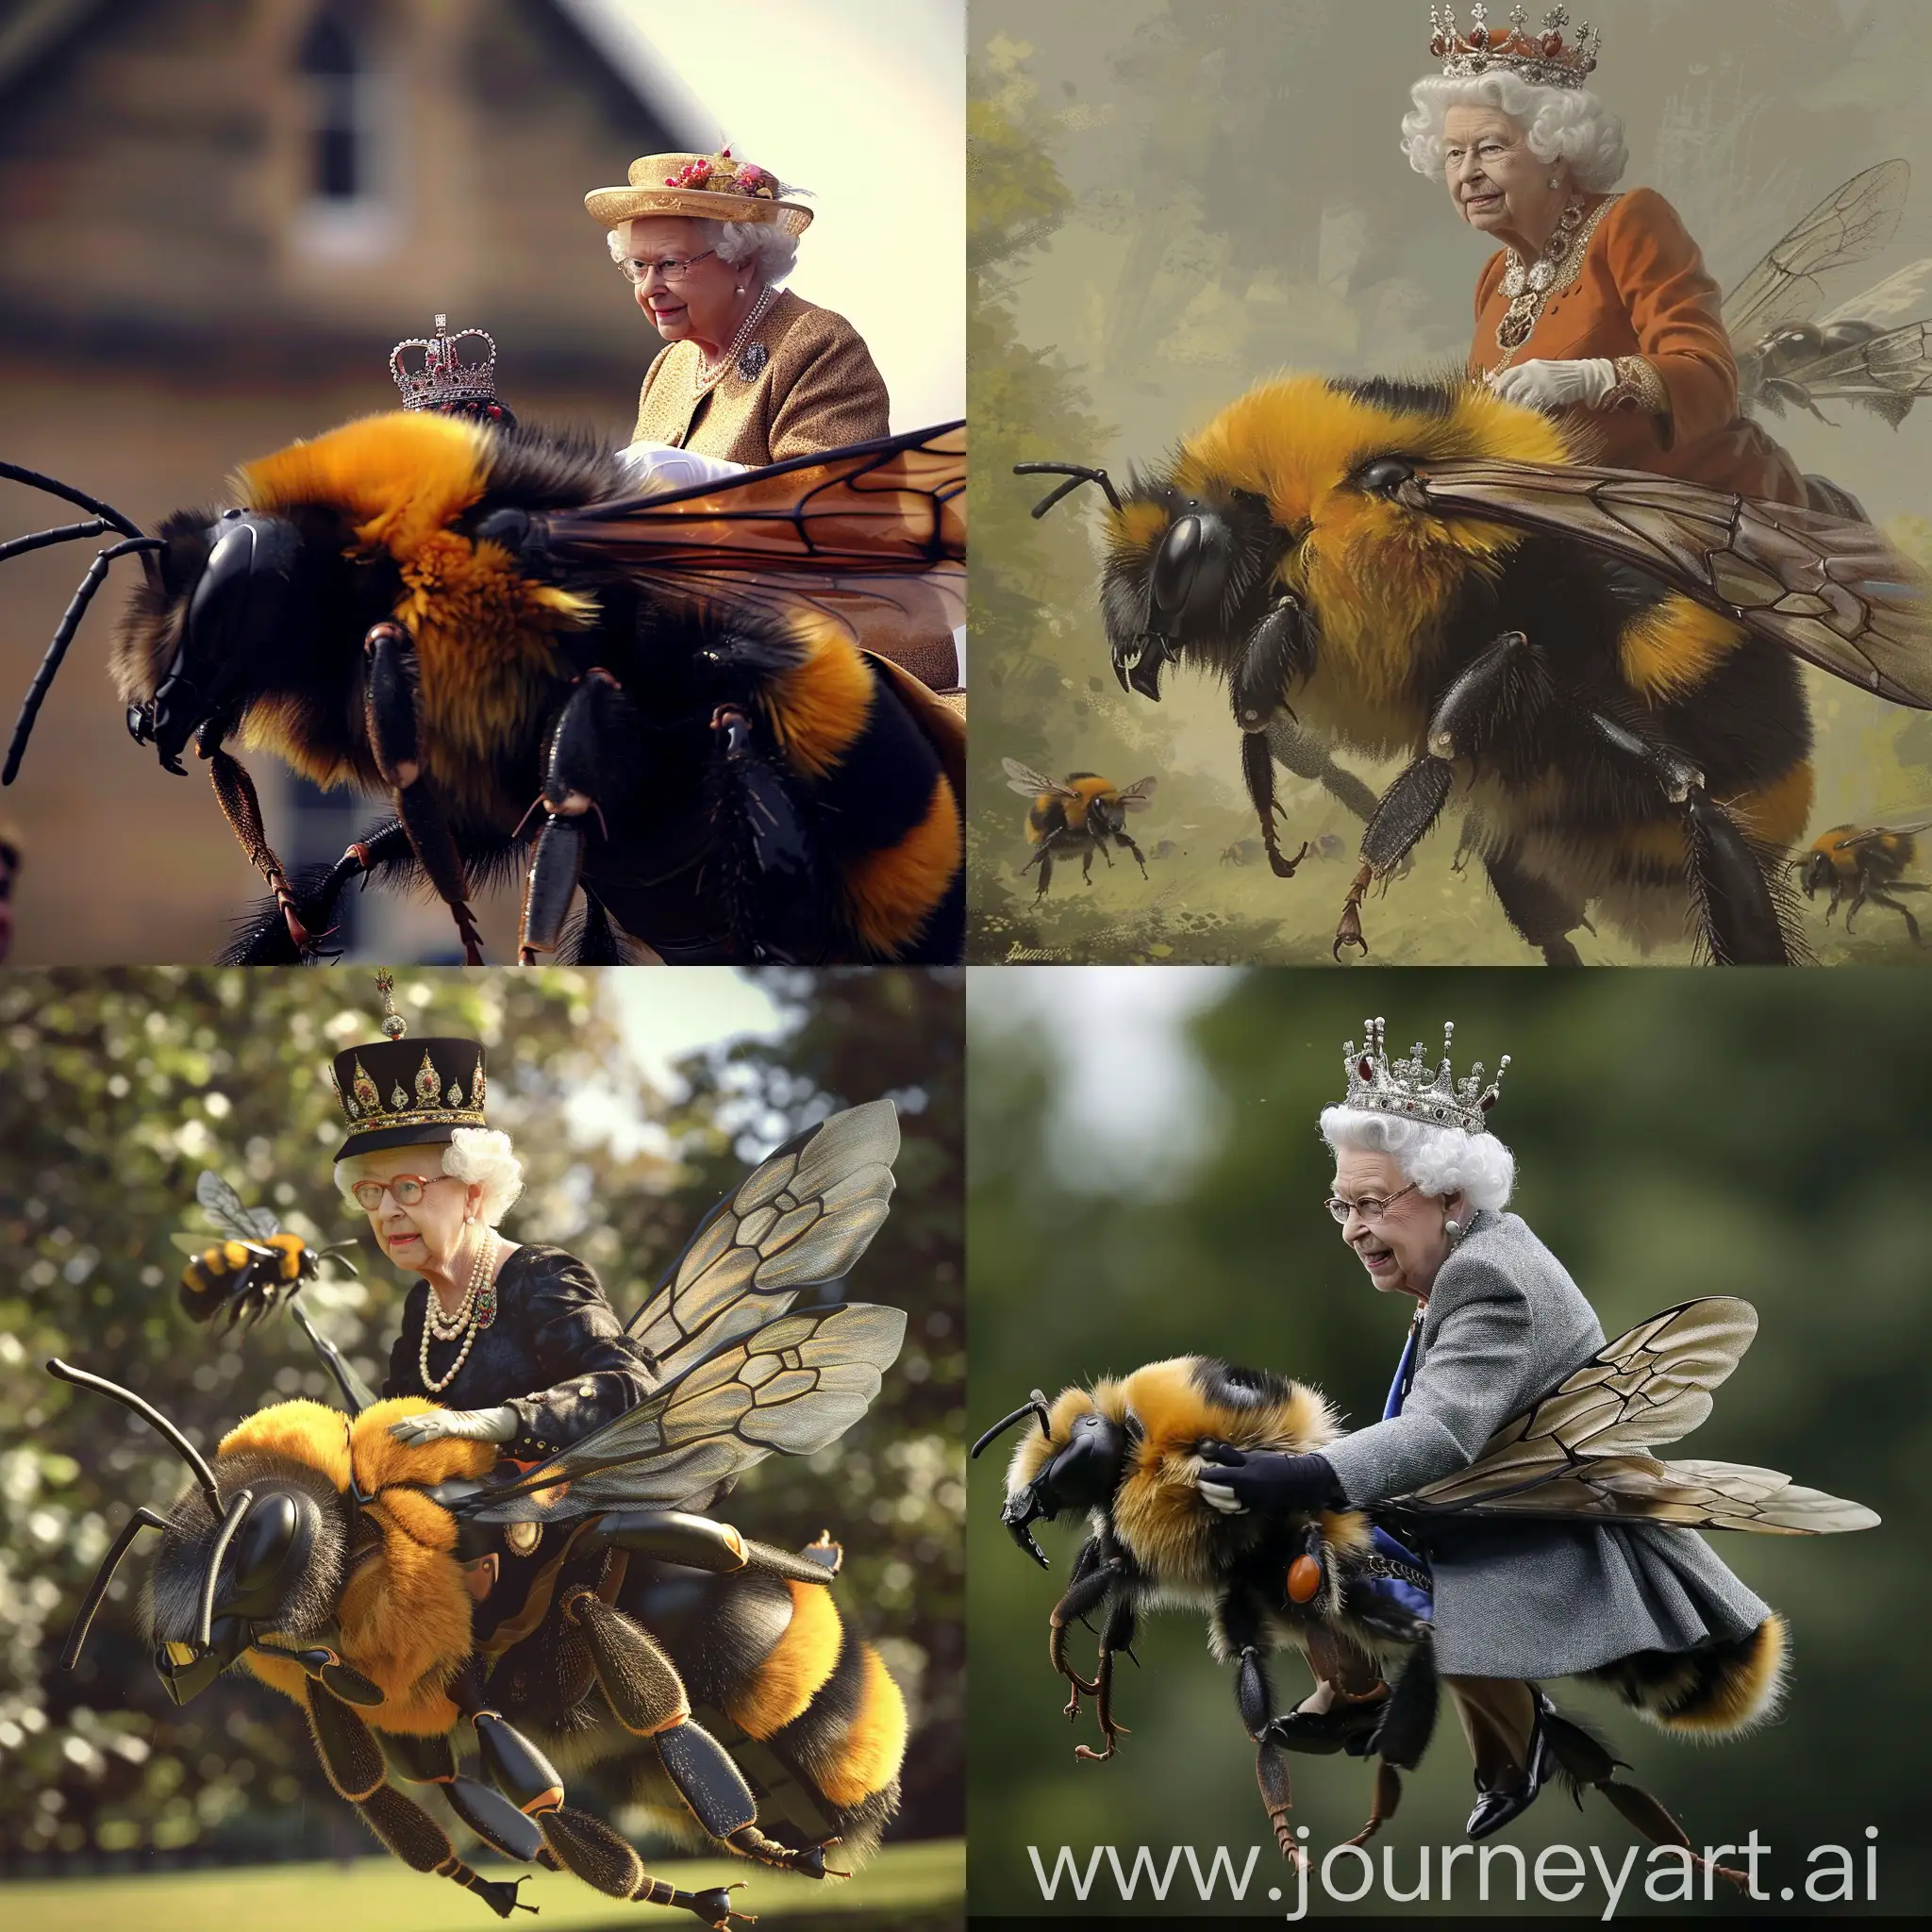 The Queen of England riding a giant bee.